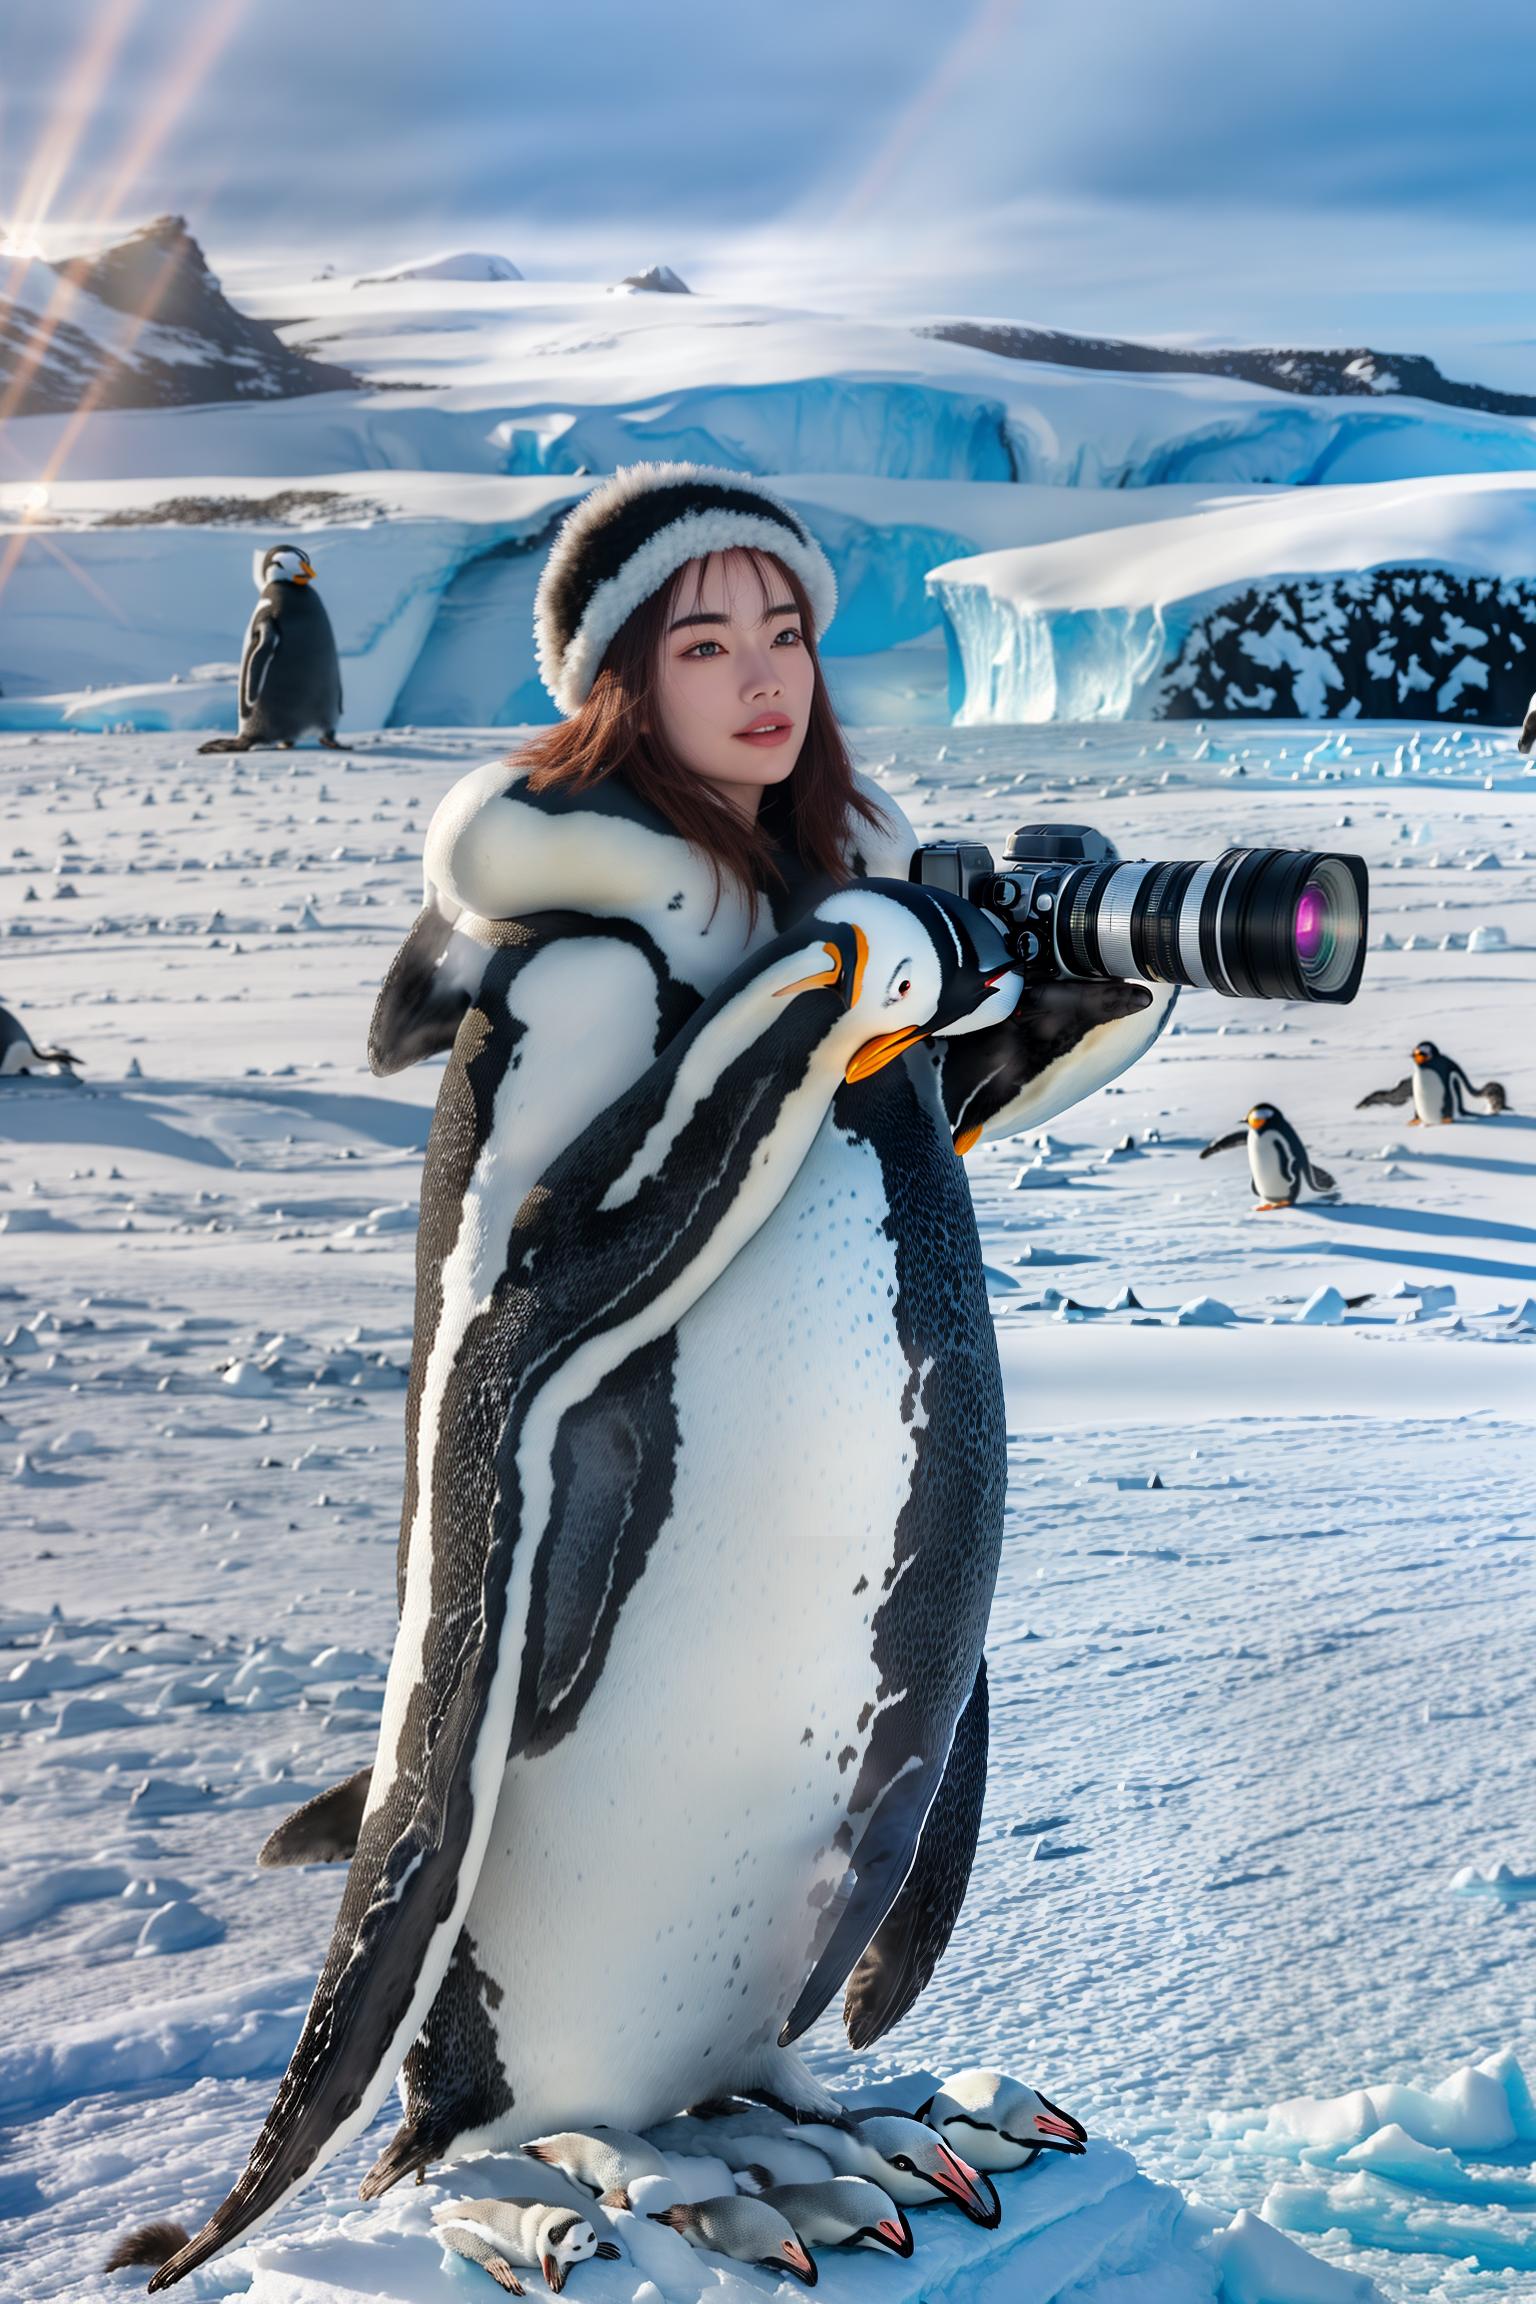  masterpiece,(bestquality),highlydetailed,(female:1.5),(beautiful:1.3),(warm clothing:1.5),{clothing: down jacket: snow boots: fur trimmed hat:1.3},(holding a camera:1.5),(determined gaze:1.3),(rosy cheeks:1.5),(Antarctic landscape:1.5),{landscape: snow covered plains or mountains:1.3},(group of penguins:1.5),{penguins: separated from the character:1.2},(glaciers and blizzard:1.3),(sunlight piercing the clouds:1.5),{symbol: optimism: resilience:1.2} hyperrealistic, full body, detailed clothing, highly detailed, cinematic lighting, stunningly beautiful, intricate, sharp focus, f/1. 8, 85mm, (centered image composition), (professionally color graded), ((bright soft diffused light)), volumetric fog, trending on instagram, trending on tumblr, HDR 4K, 8K